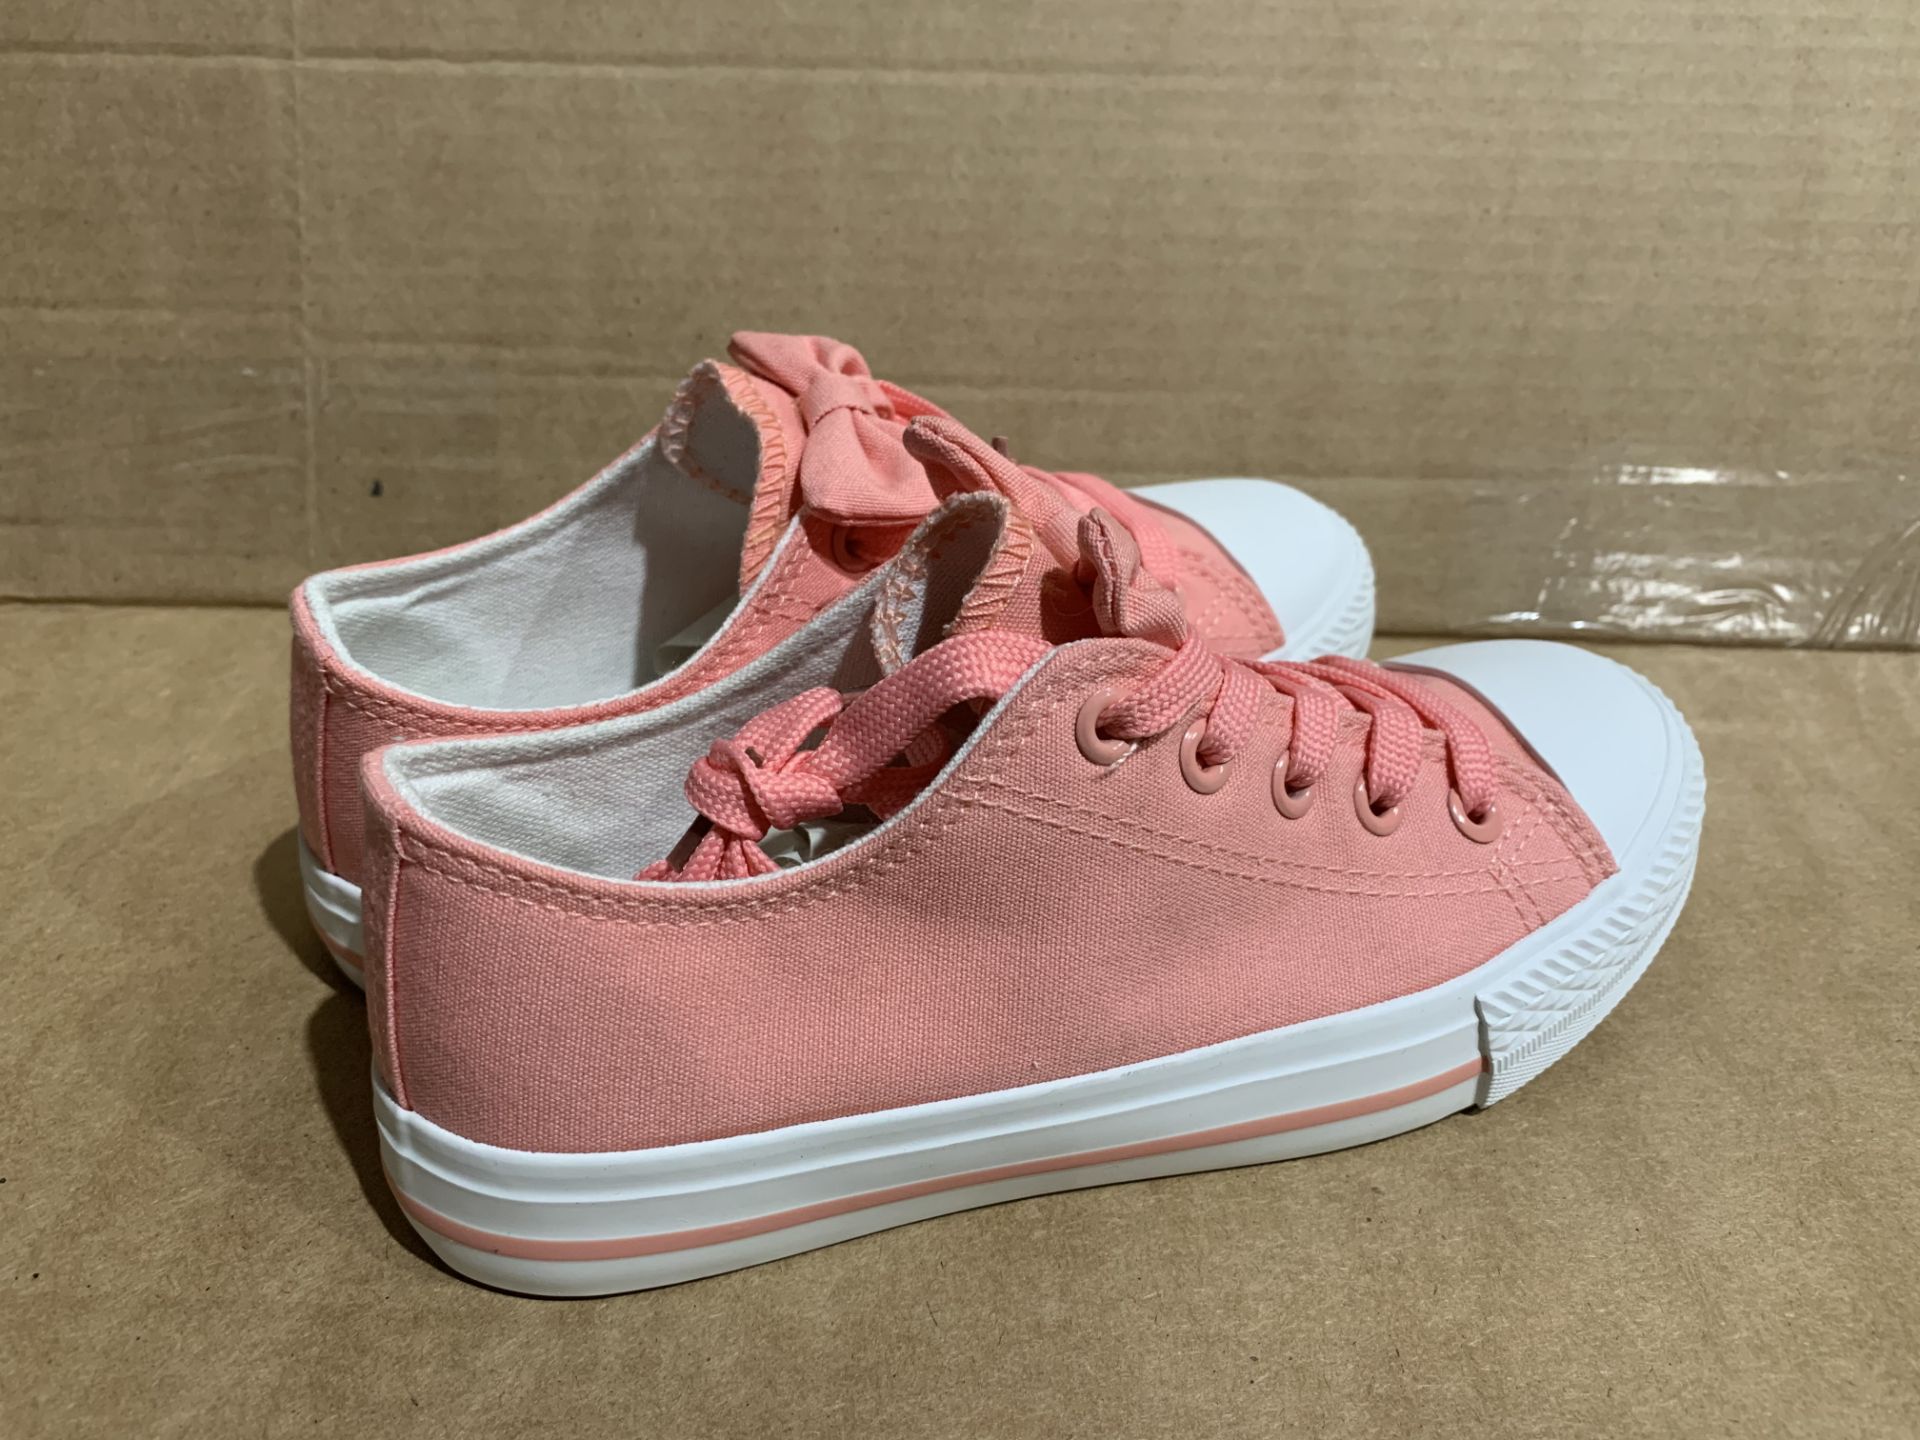 (NO VAT) 12 X BRAND NEW GIRLS PINK BOW TOP TRAINERS SIZE i13